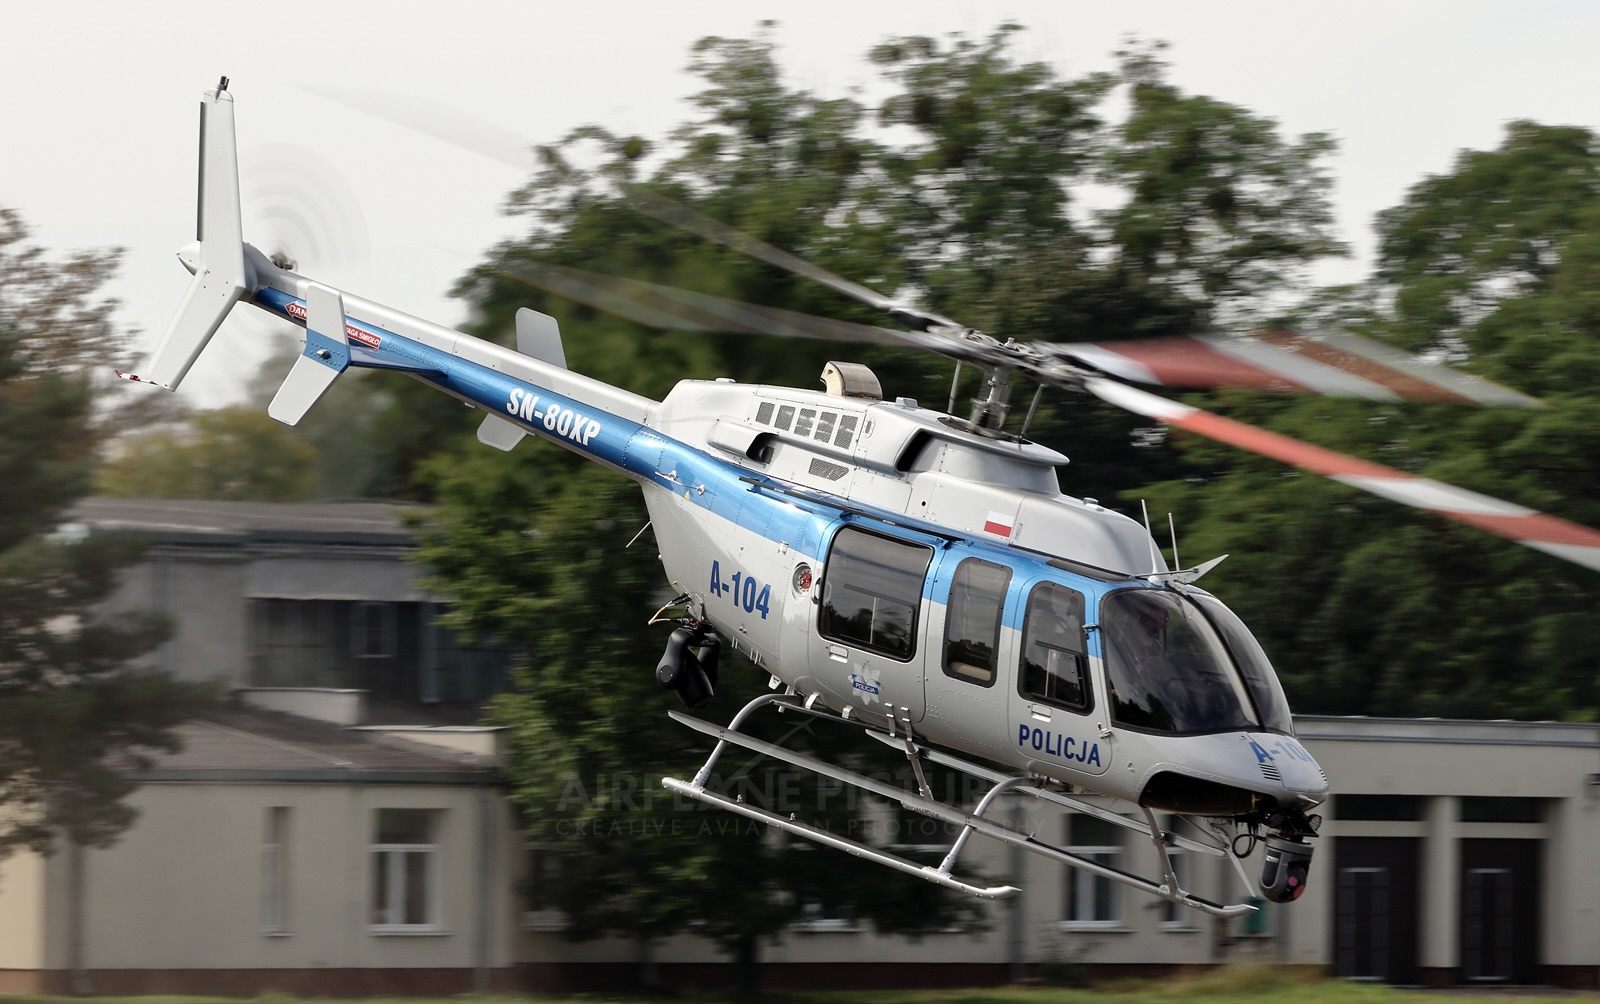 Polish police seeking four more Bell 407GXis